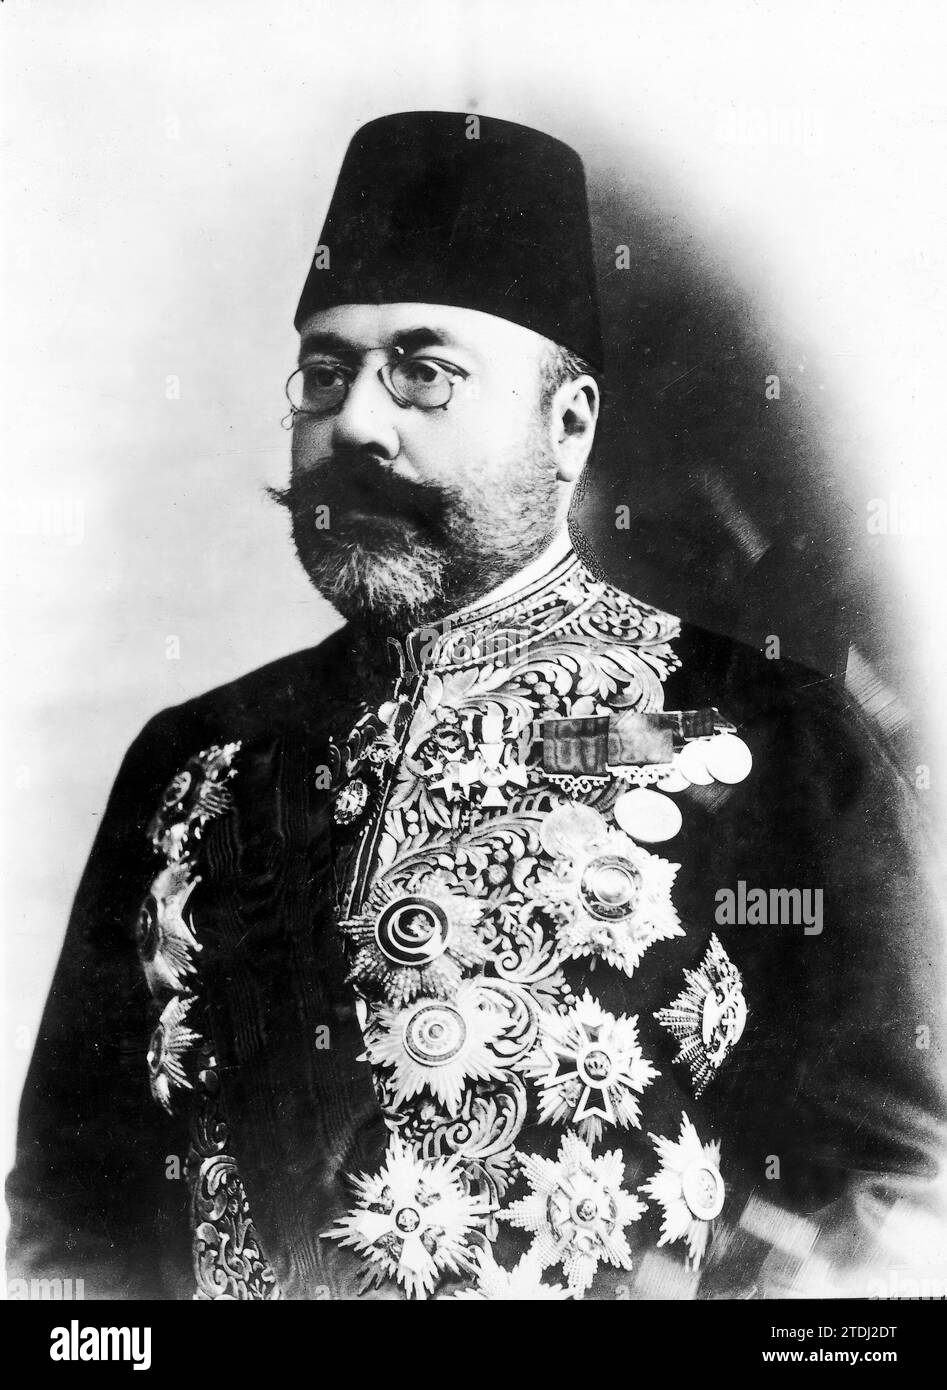 12/31/1909. End of the Turkish crisis. Hakki-Bey, new grand vizier appointed by the Young Turks party. Credit: Album / Archivo ABC Stock Photo